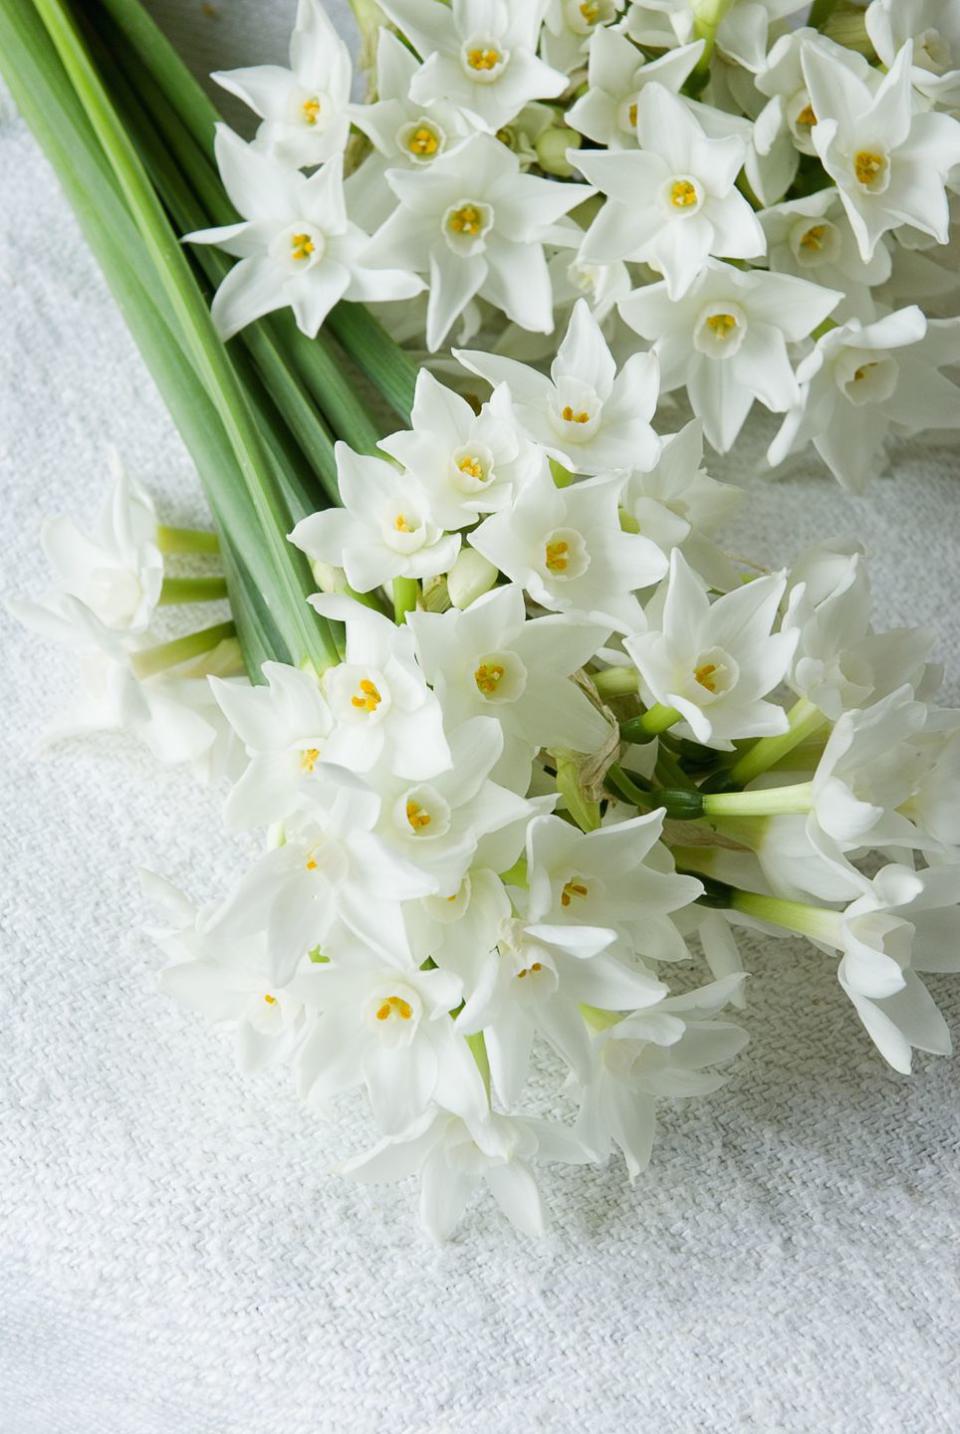 Their birth flowers are holly and narcissus.